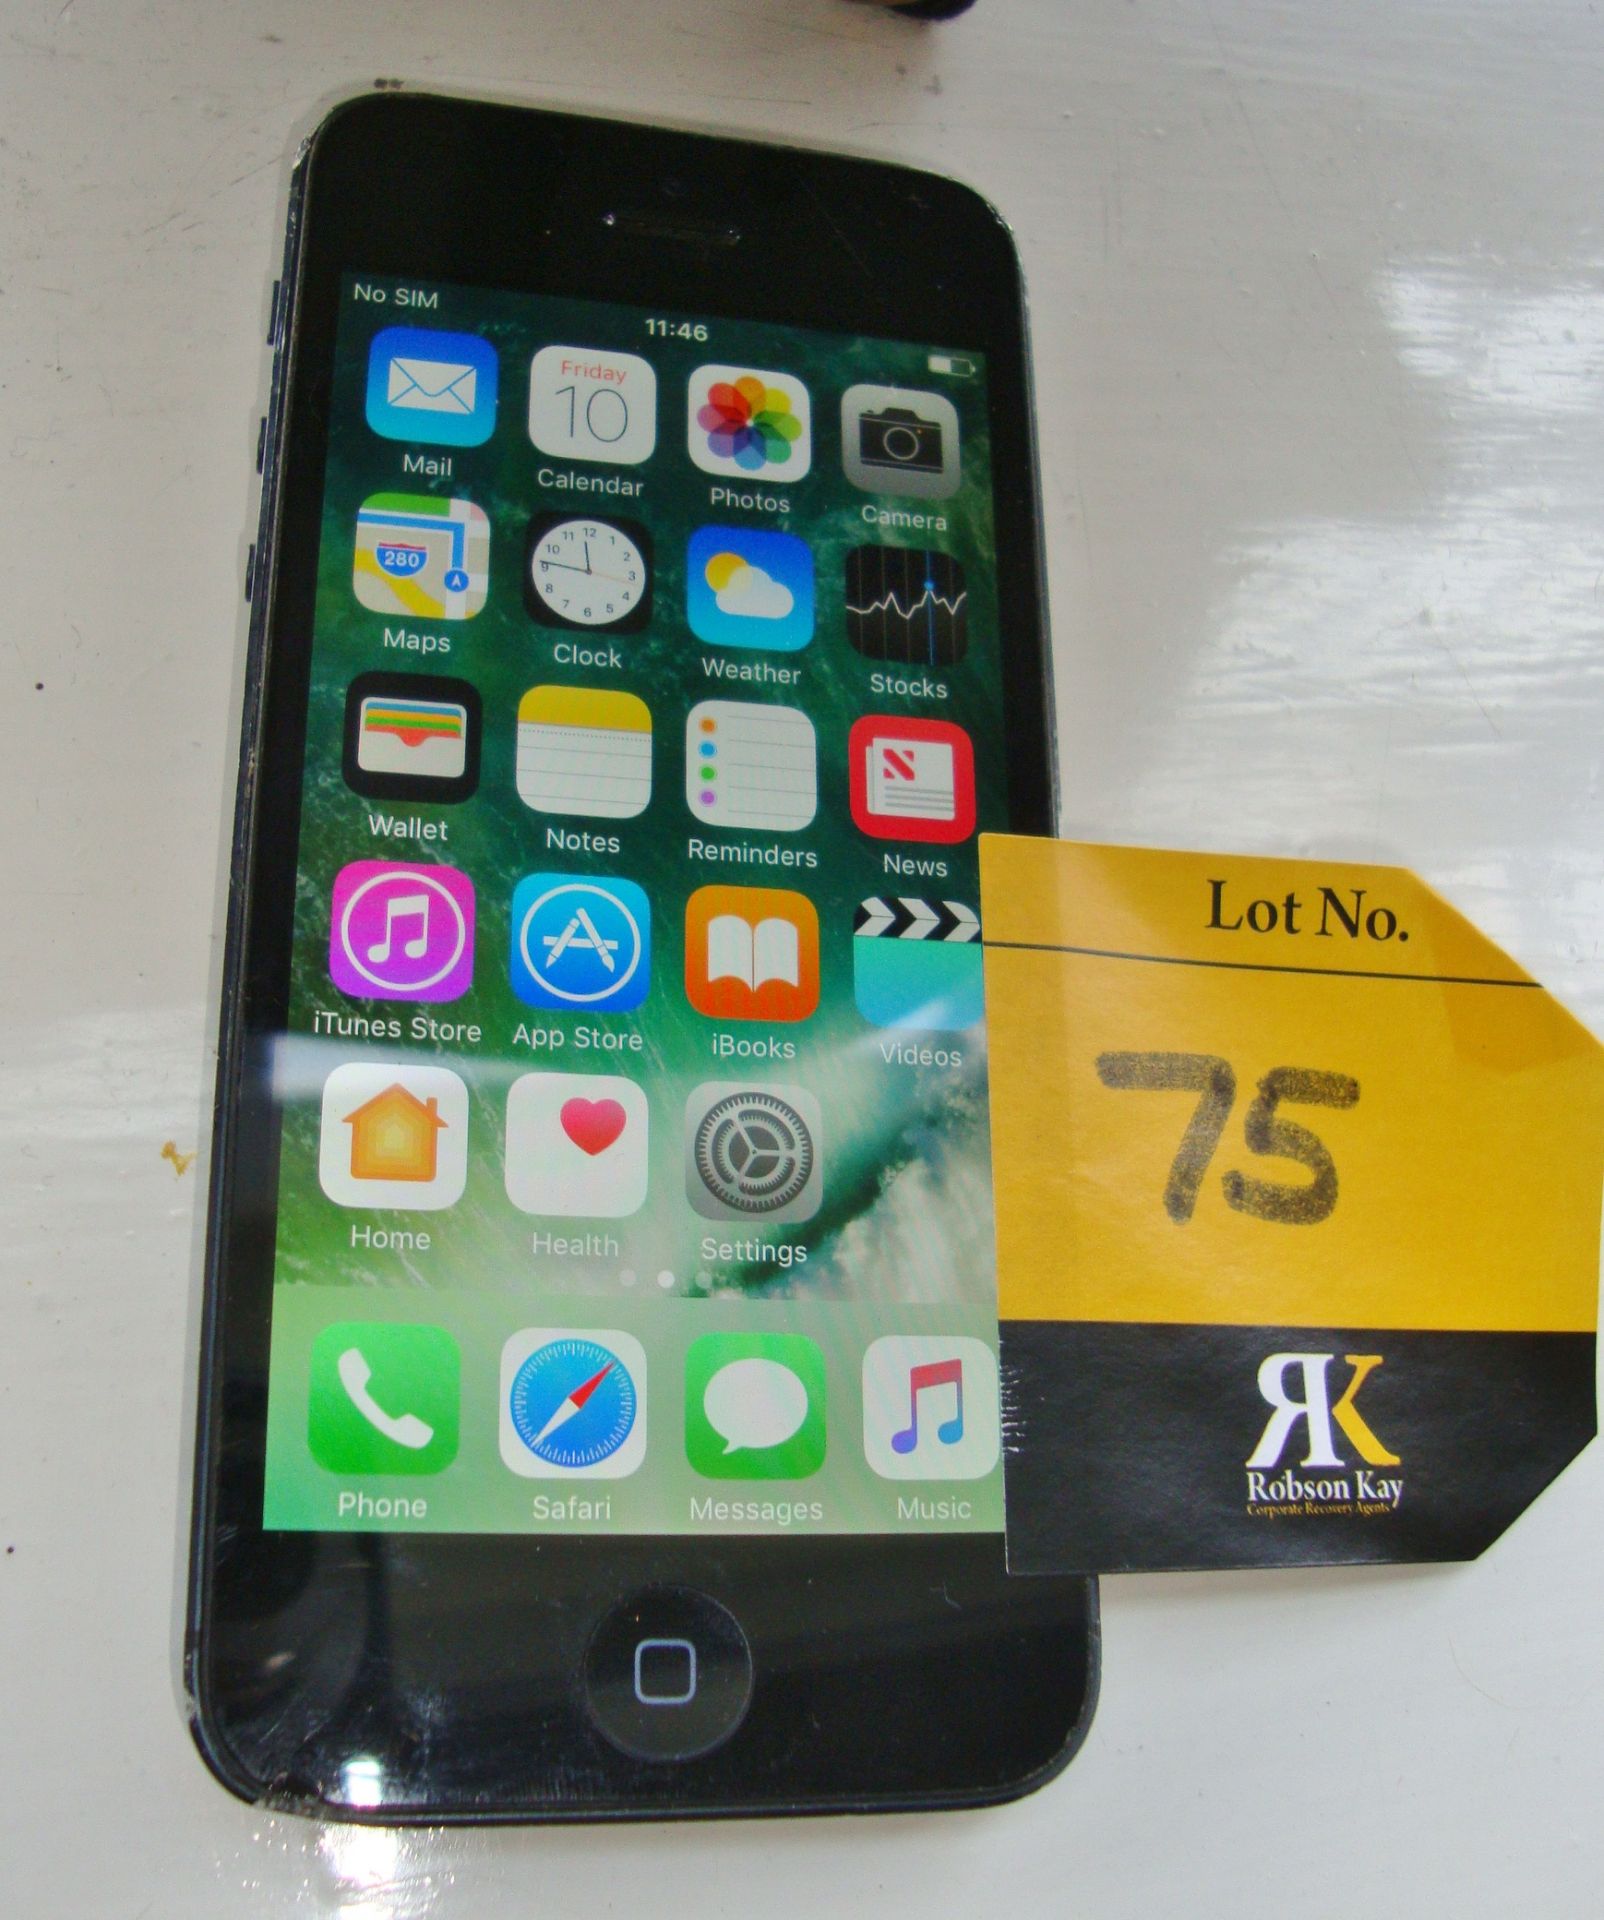 Apple iPhone 5 model A1429 - no accessories